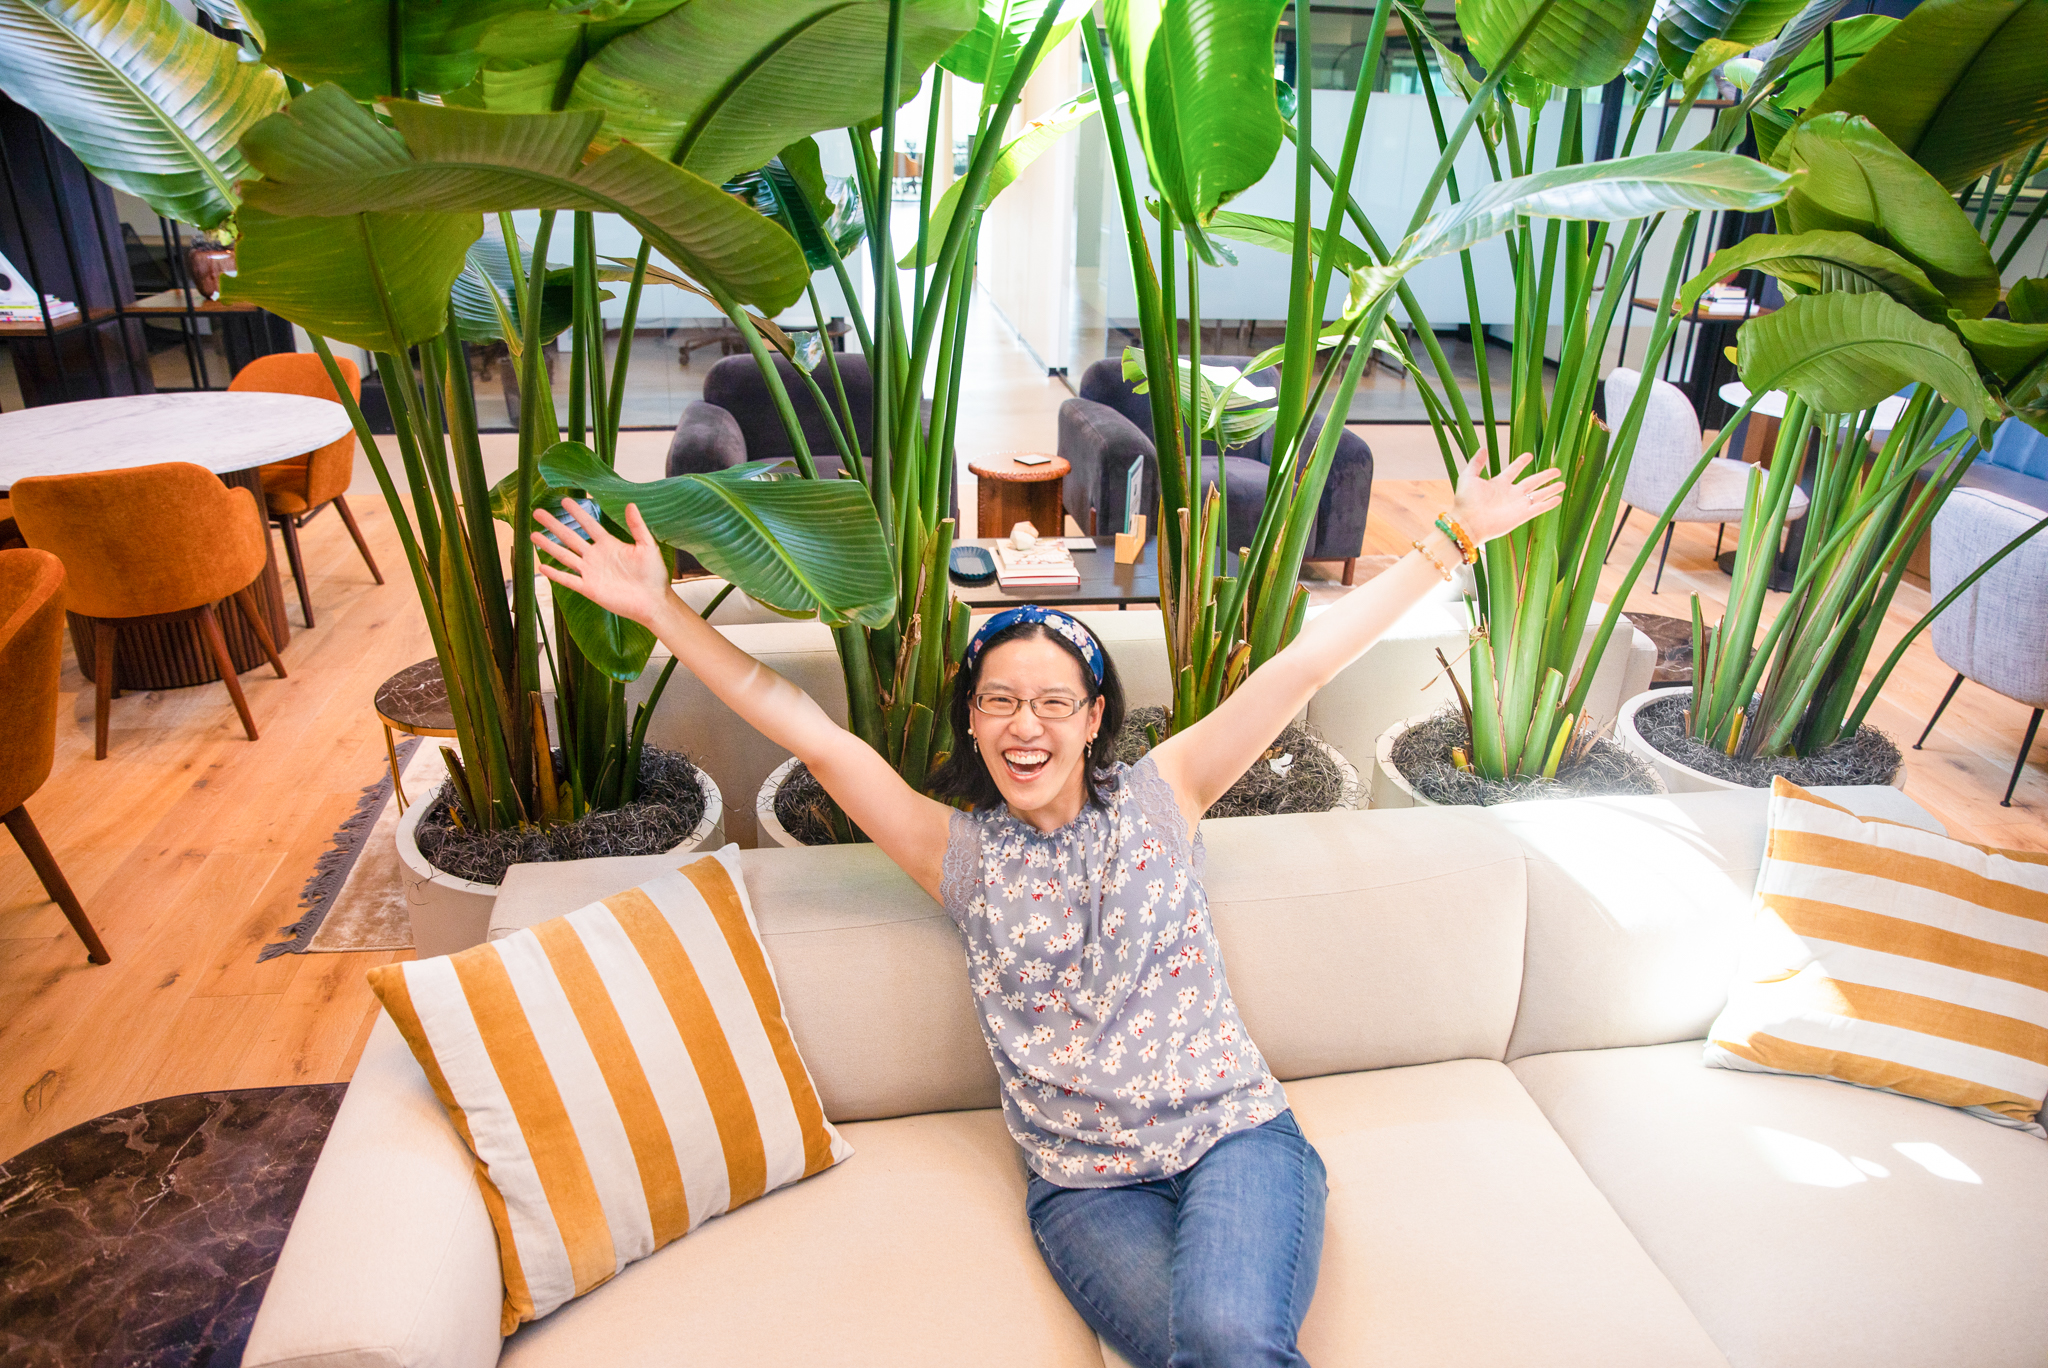 An Asian woman with her arms up showing excitement in a co-working space.